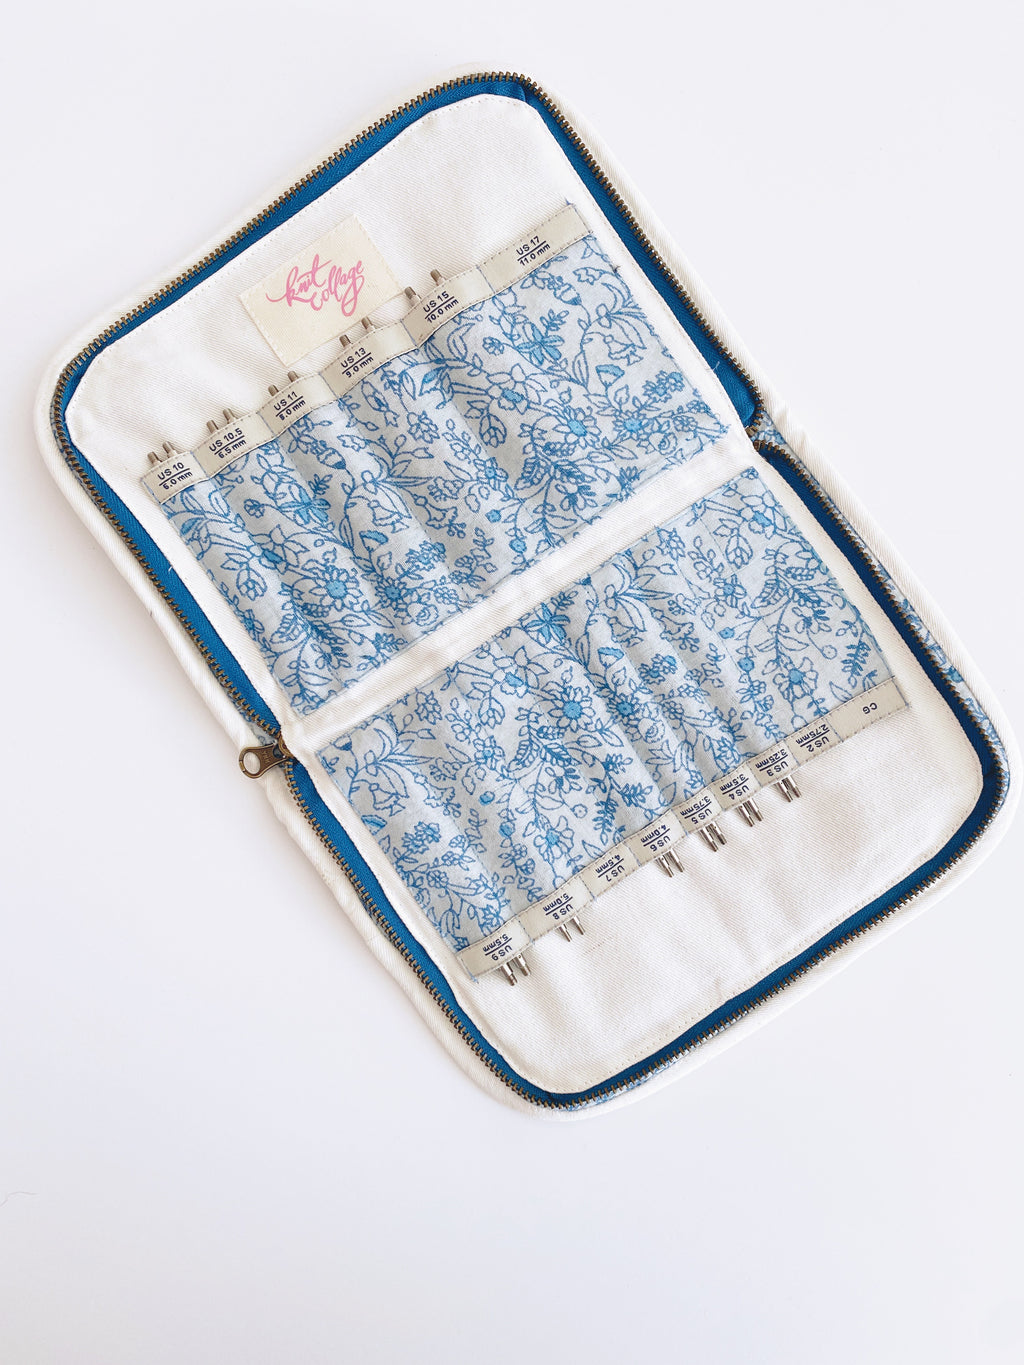 Knit Collage Interchangeable Needle Case